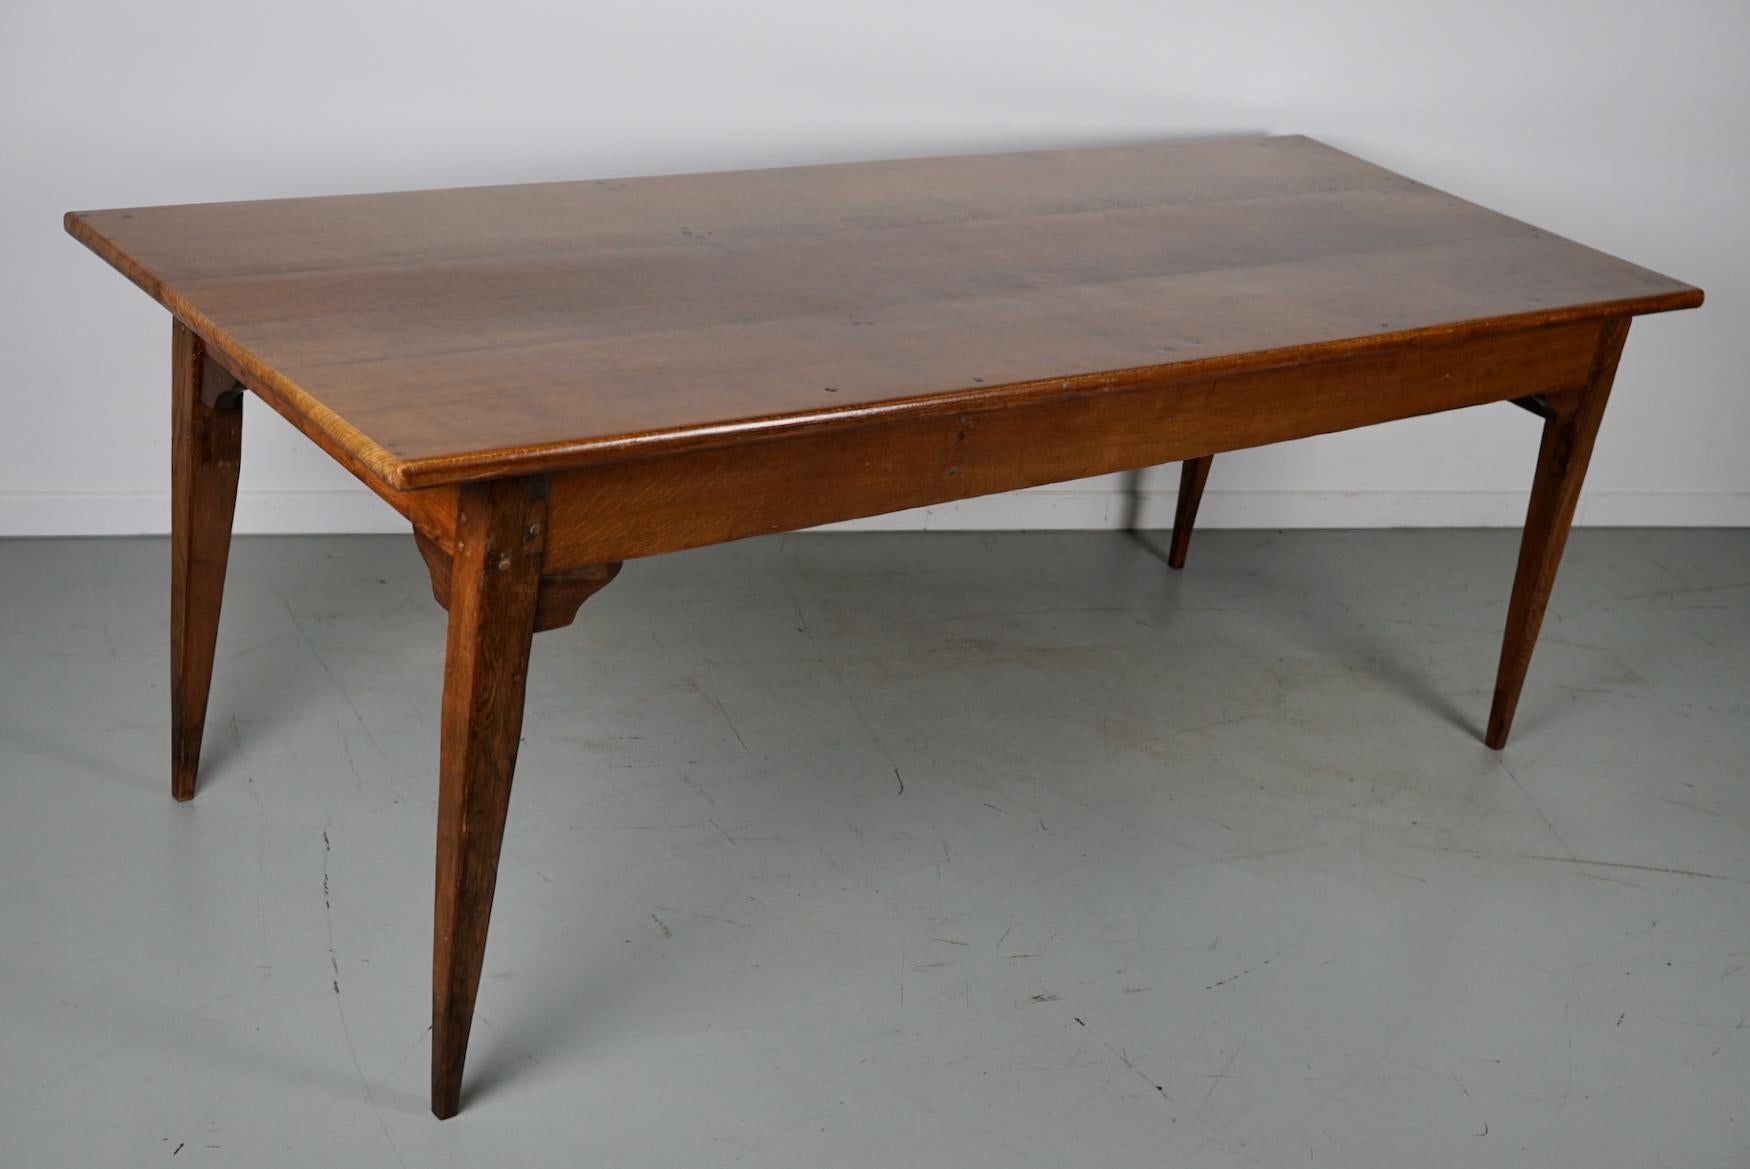 This elegant table was made in France in the 19th century. The table was made in solid oak with beautiful grain patterns. It has a very warm color and the table shows marks of use, old repairs and a has a great patina. The knee height is 61.5 cm.